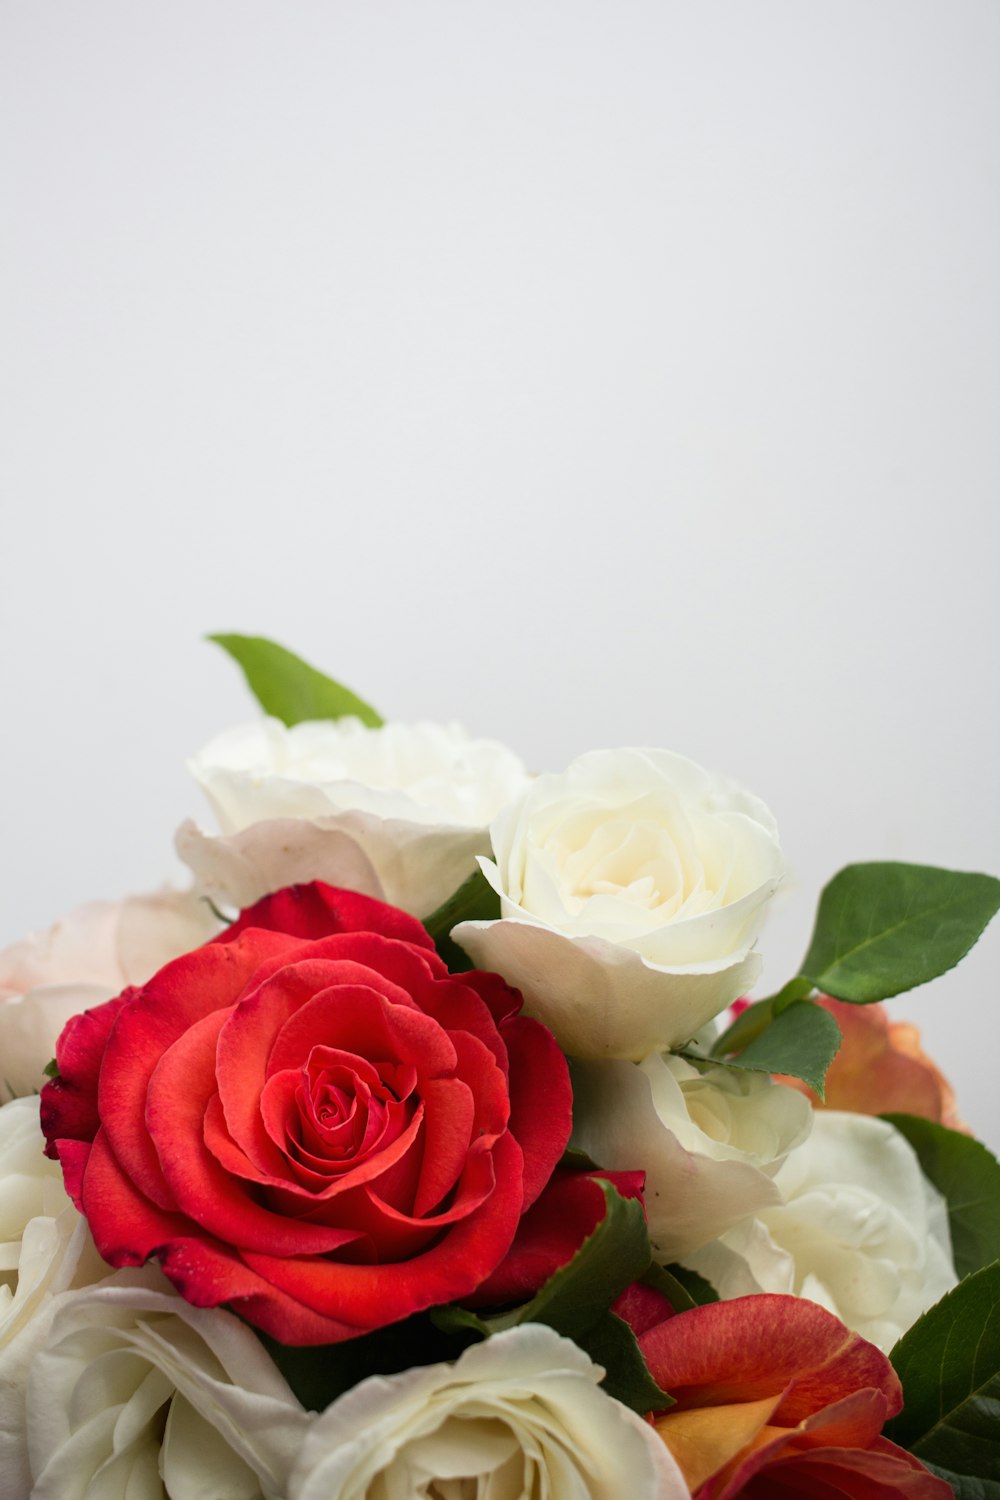 500+ Red And White Rose Pictures [Hq] | Download Free Images On Unsplash